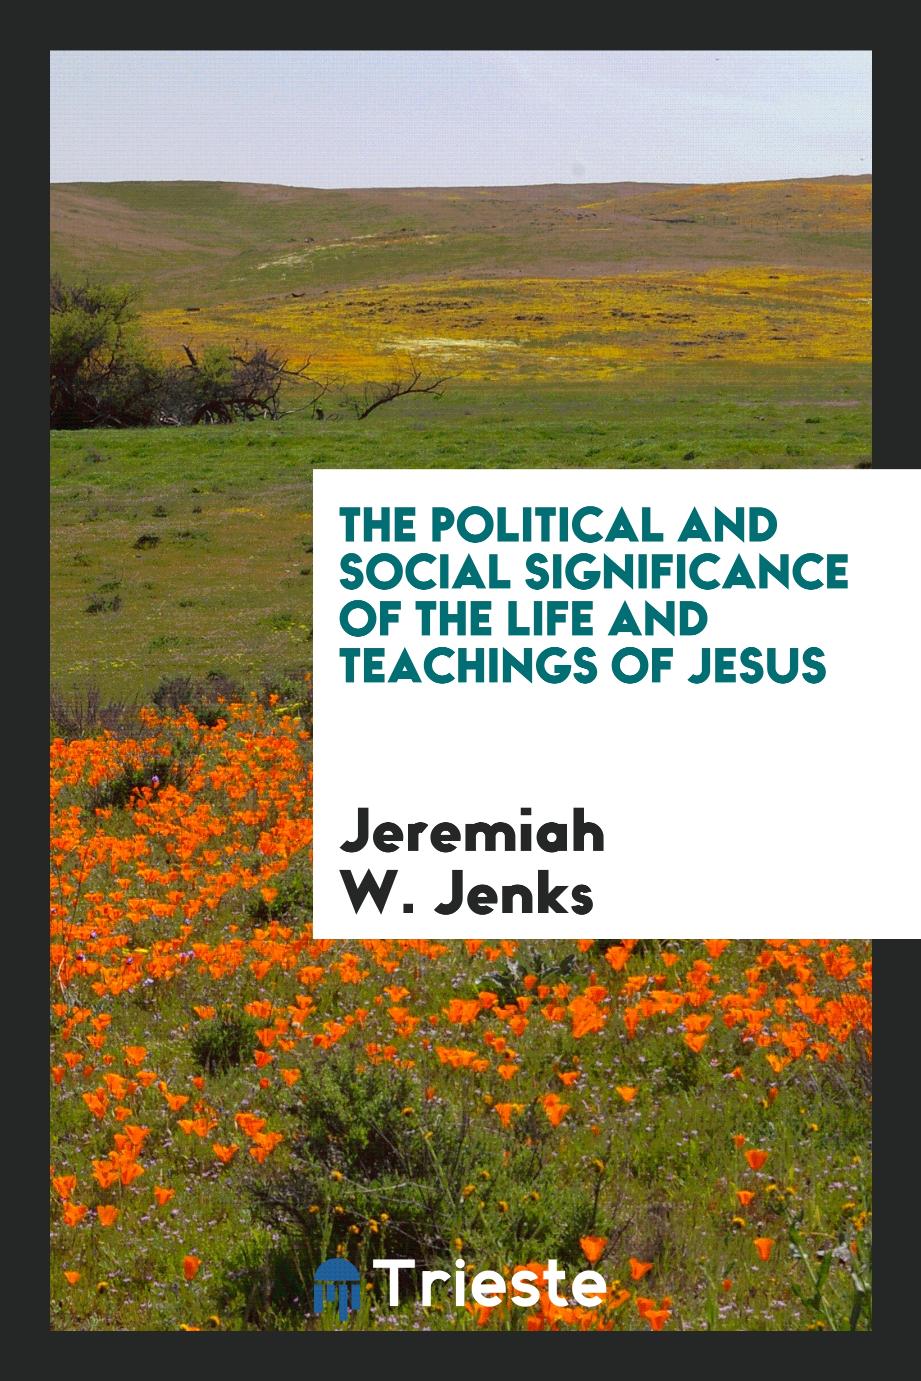 The political and social significance of the life and teachings of Jesus